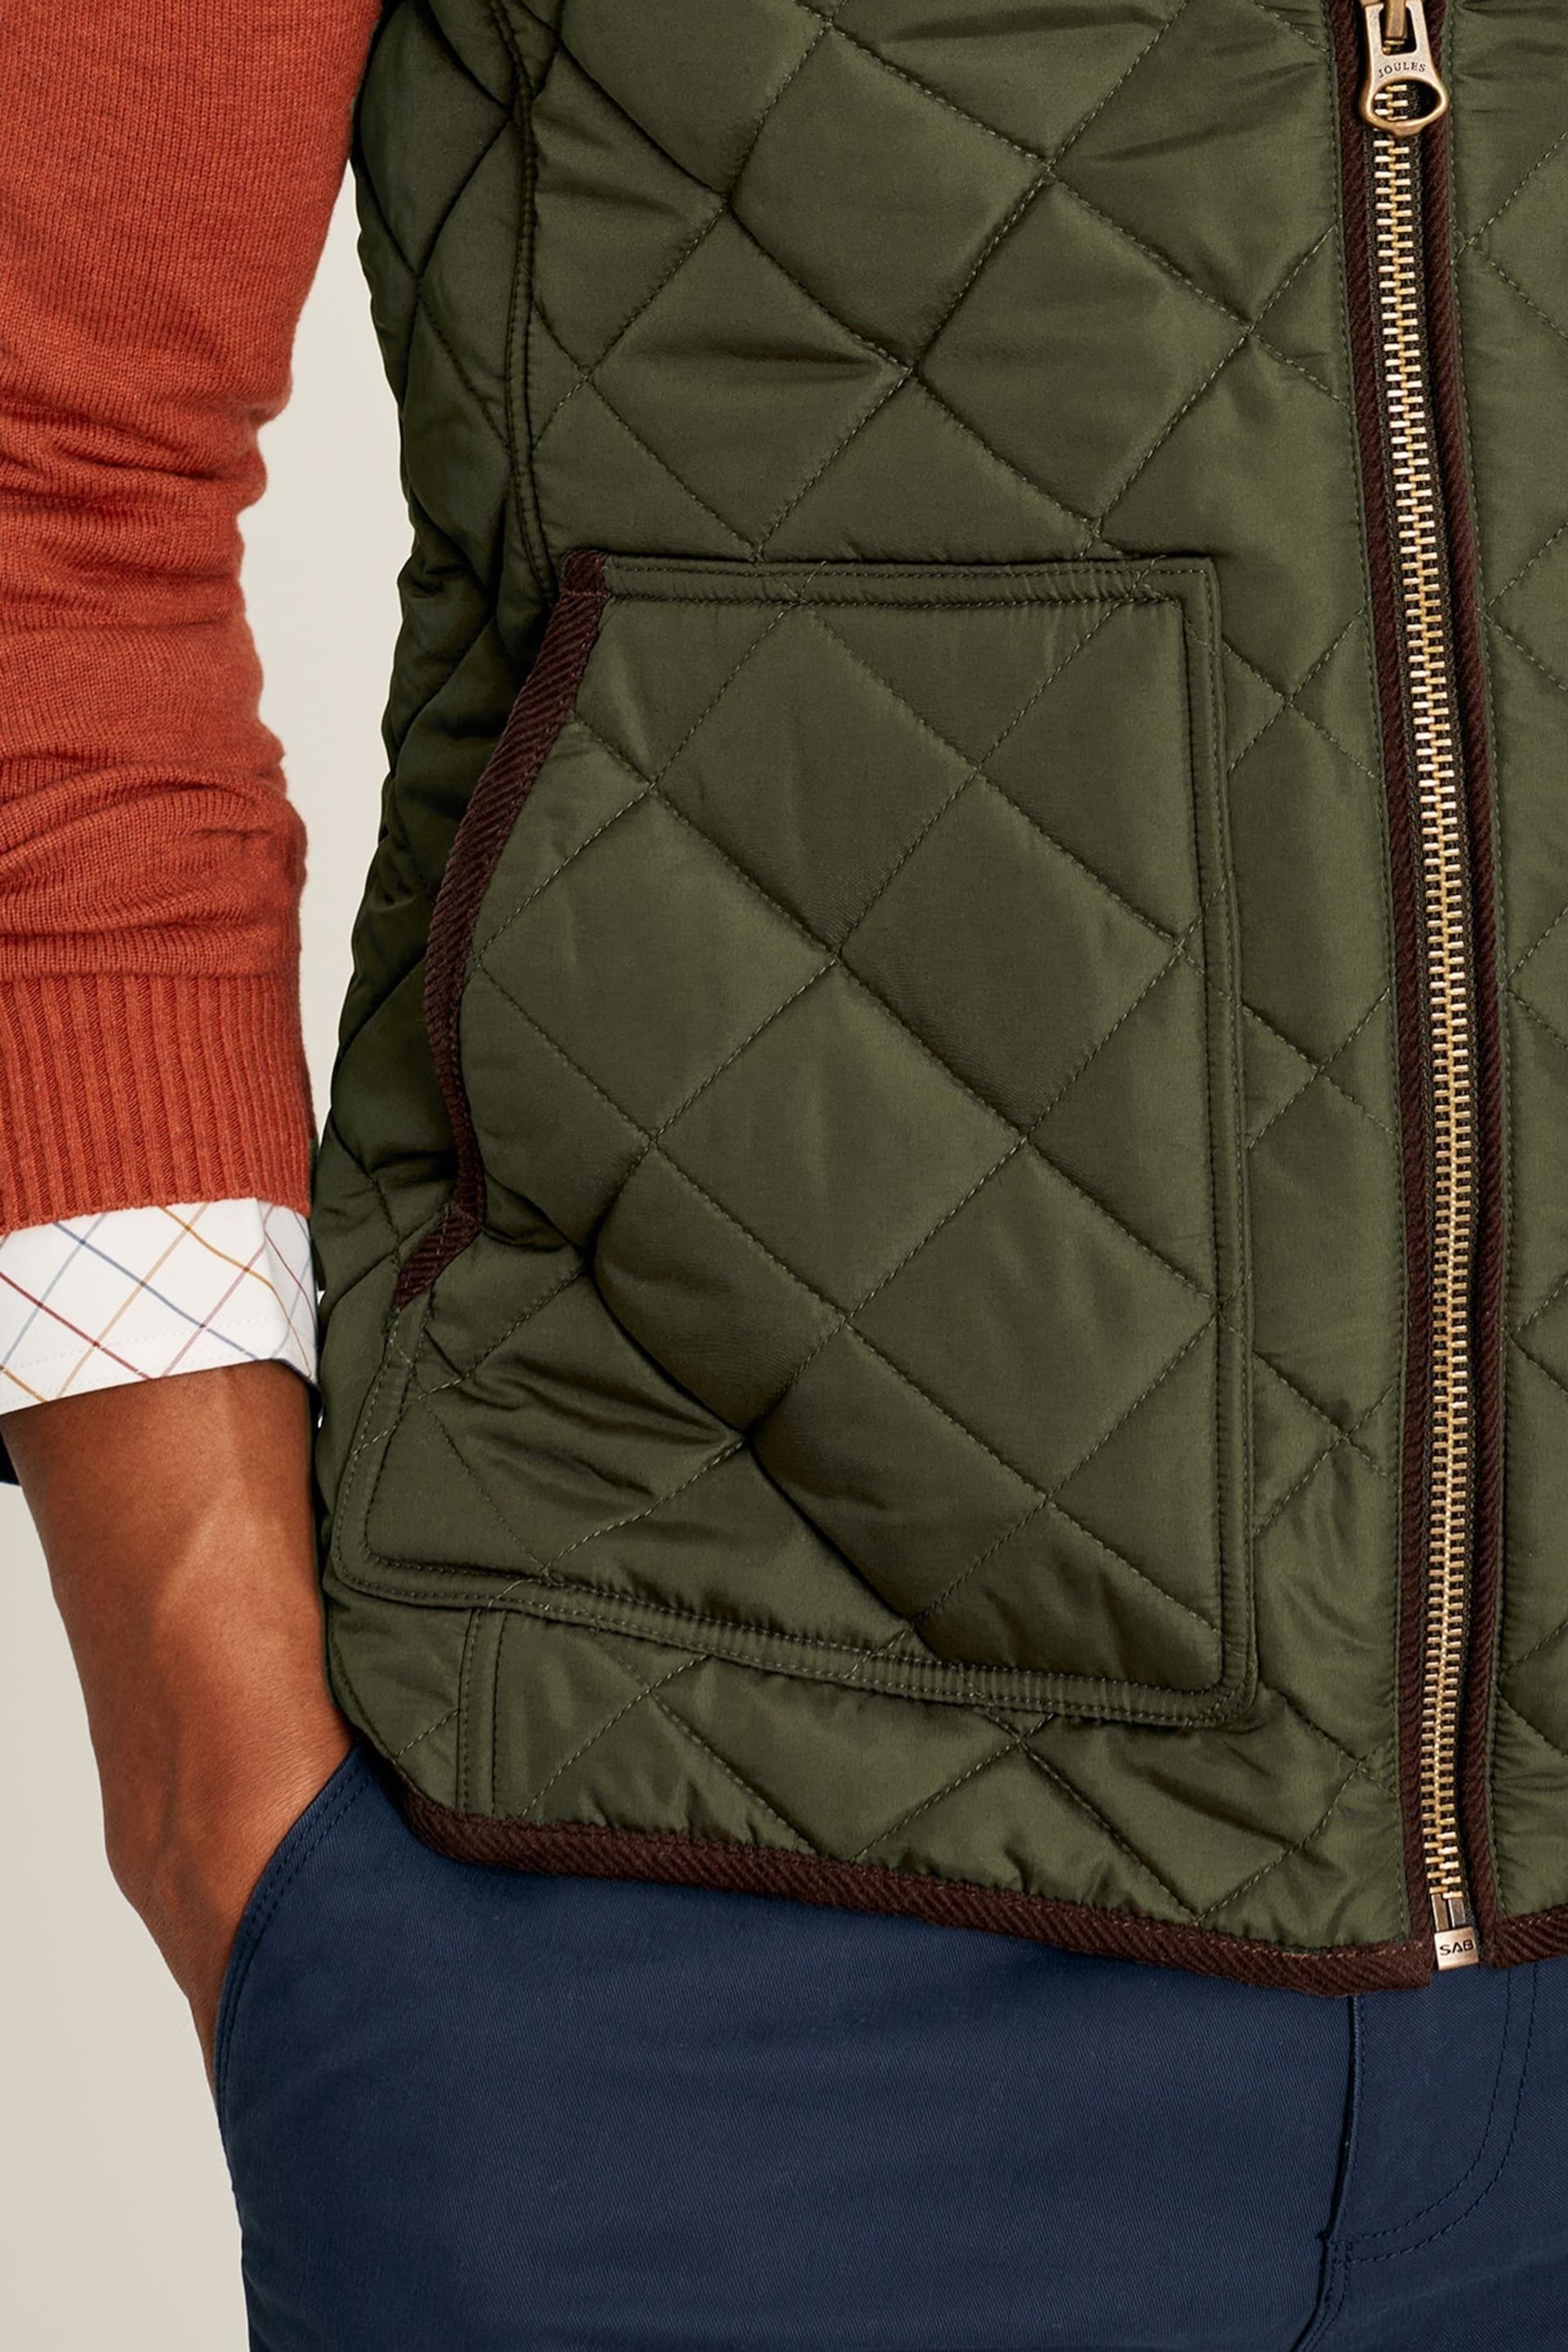 Joules Maynard Green Diamond Quilted Gilet - Image 4 of 6